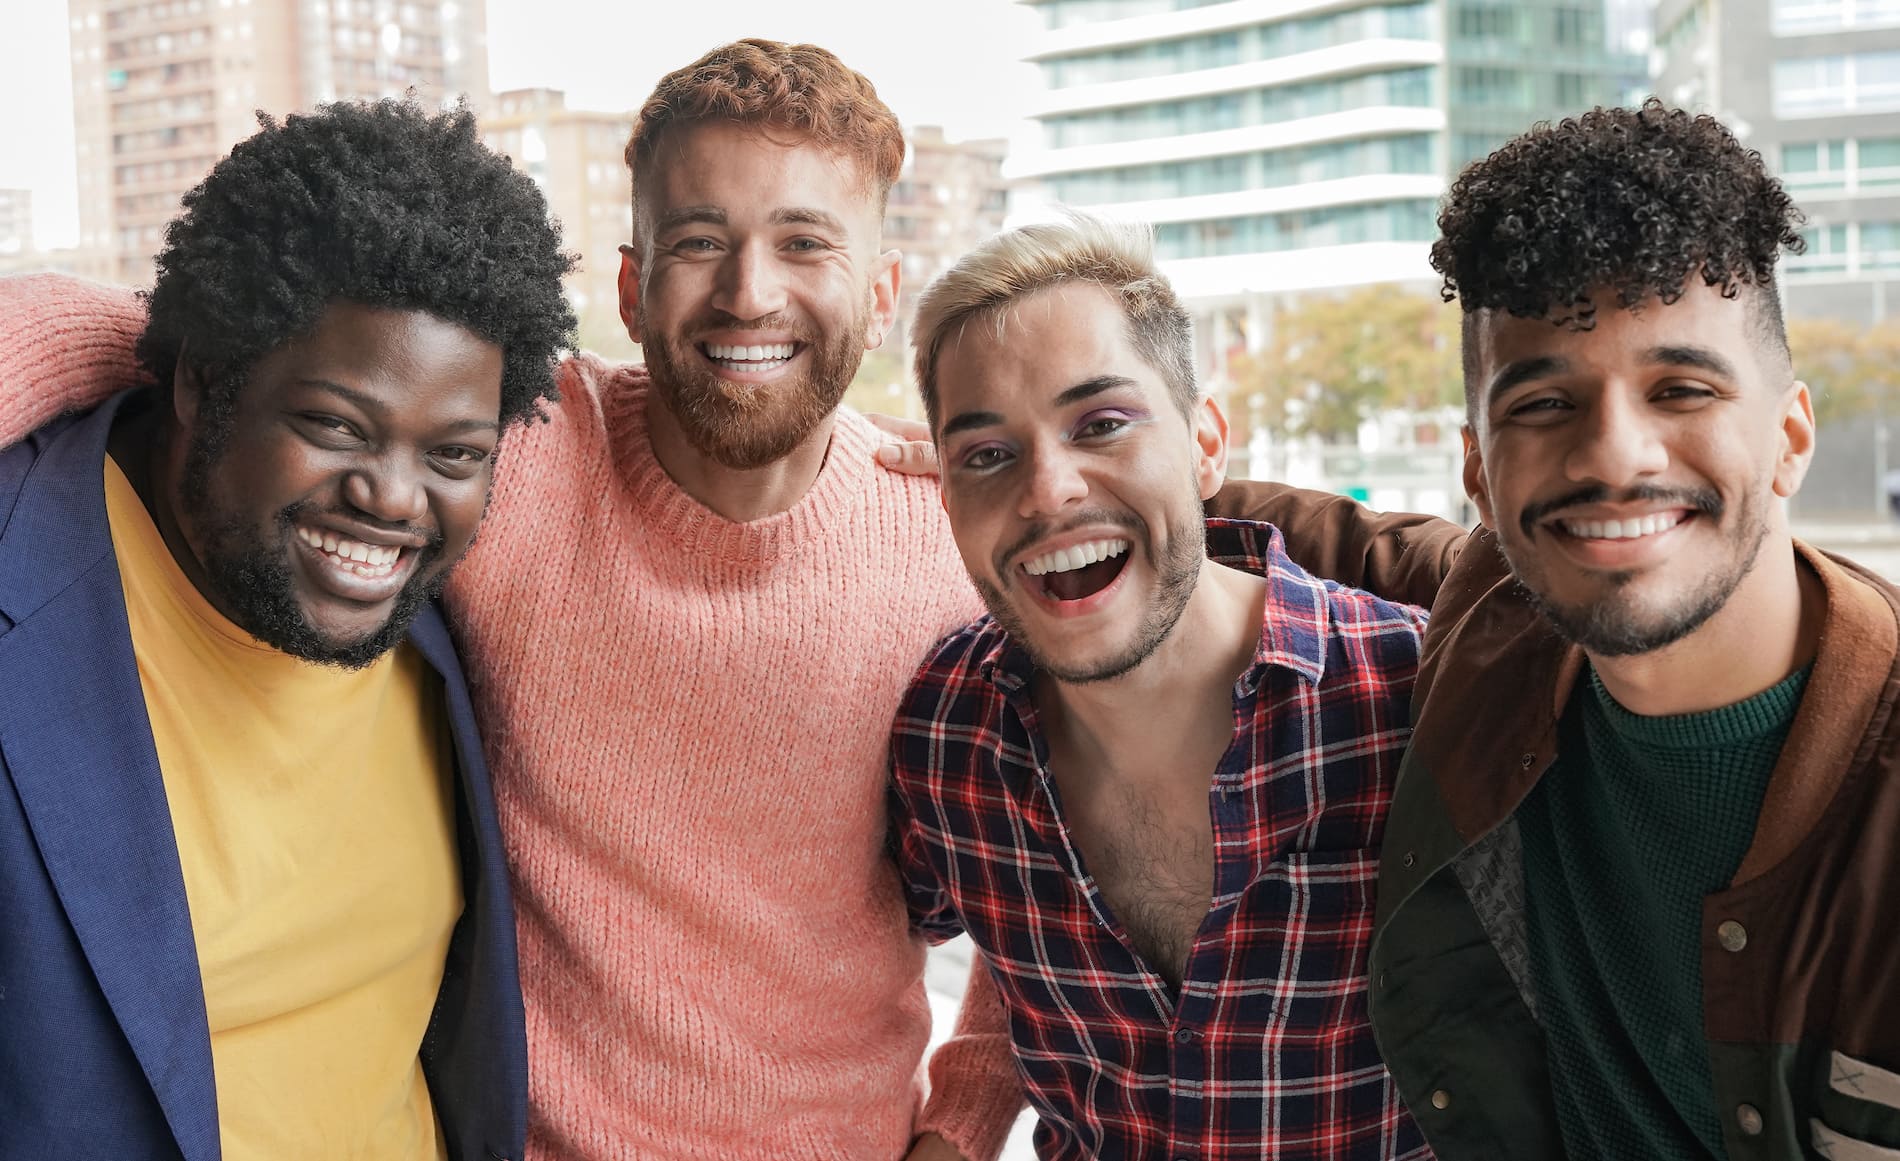 Group of young diverse men smiling, who should freeze their sperm